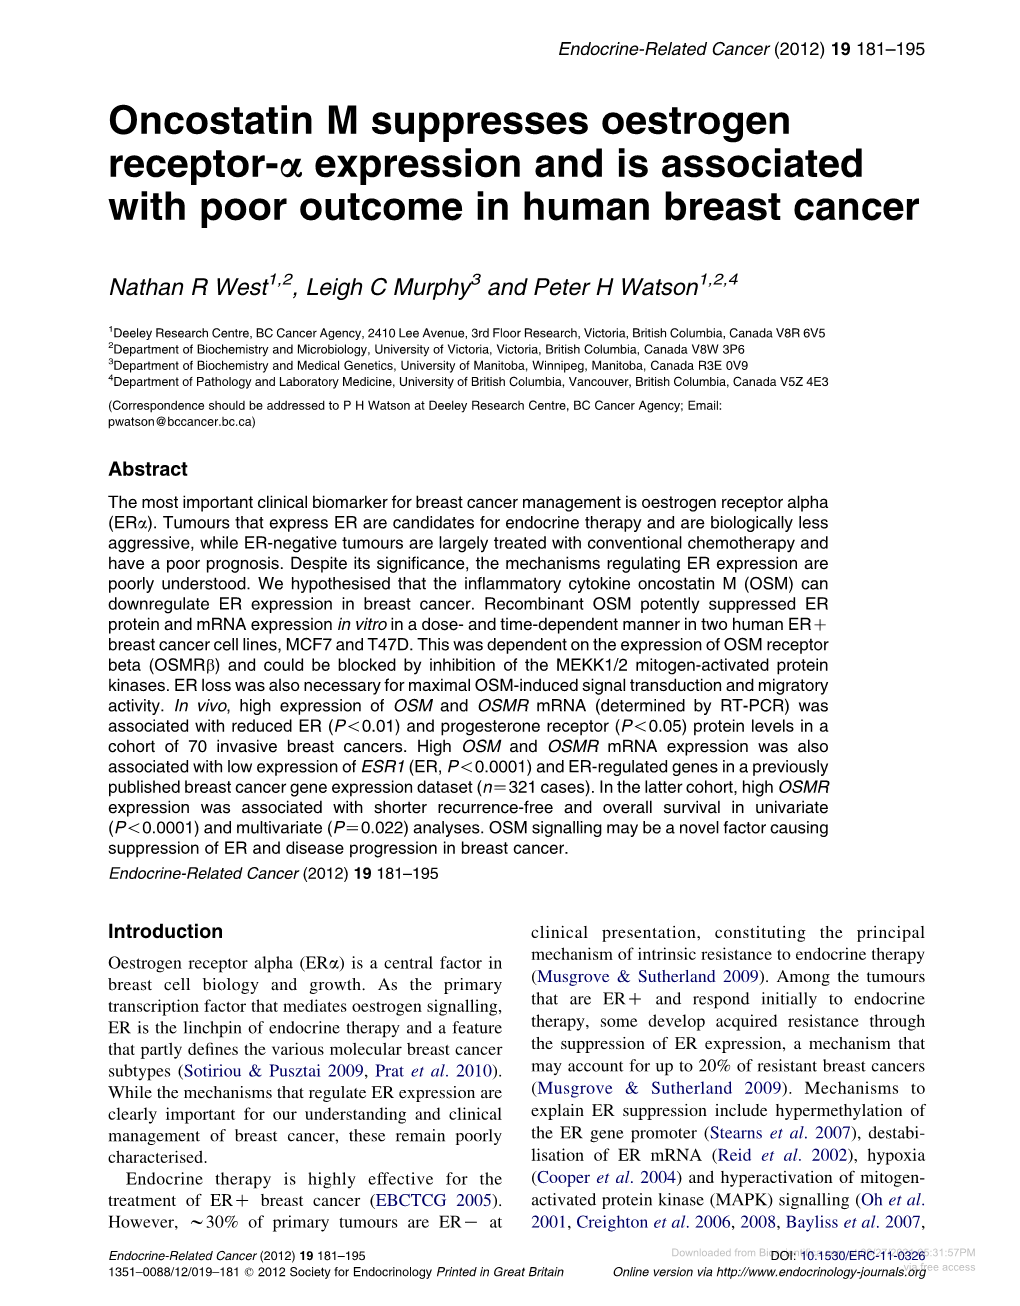 Oncostatin M Suppresses Oestrogen Receptor-A Expression and Is Associated with Poor Outcome in Human Breast Cancer